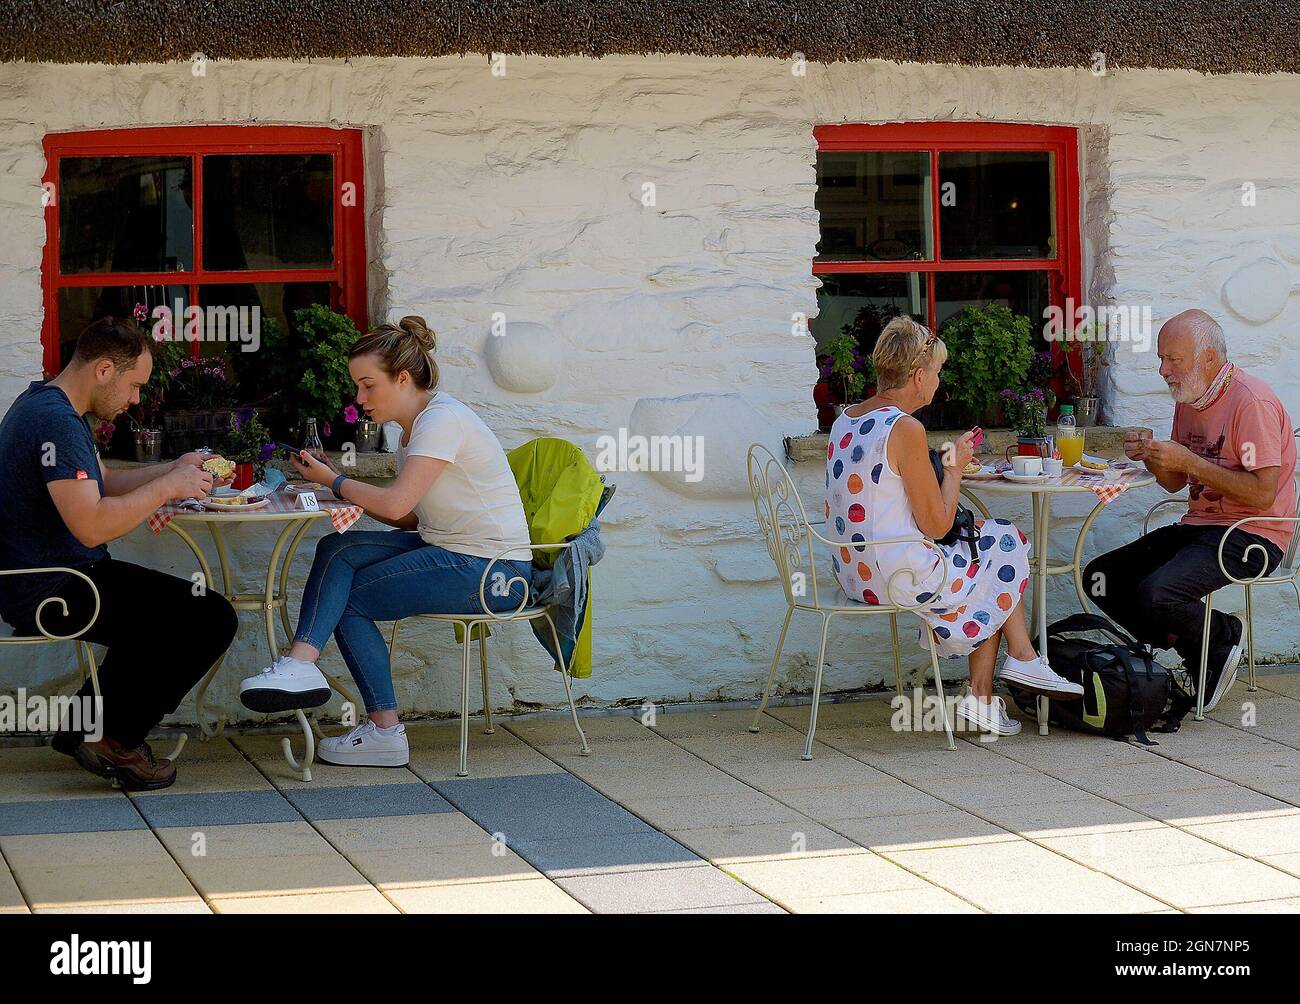 Adults dining outdoors in the Craft village in Derry, Northern Ireland 2021. ©George Sweeney / Alamy Stock Photo Stock Photo